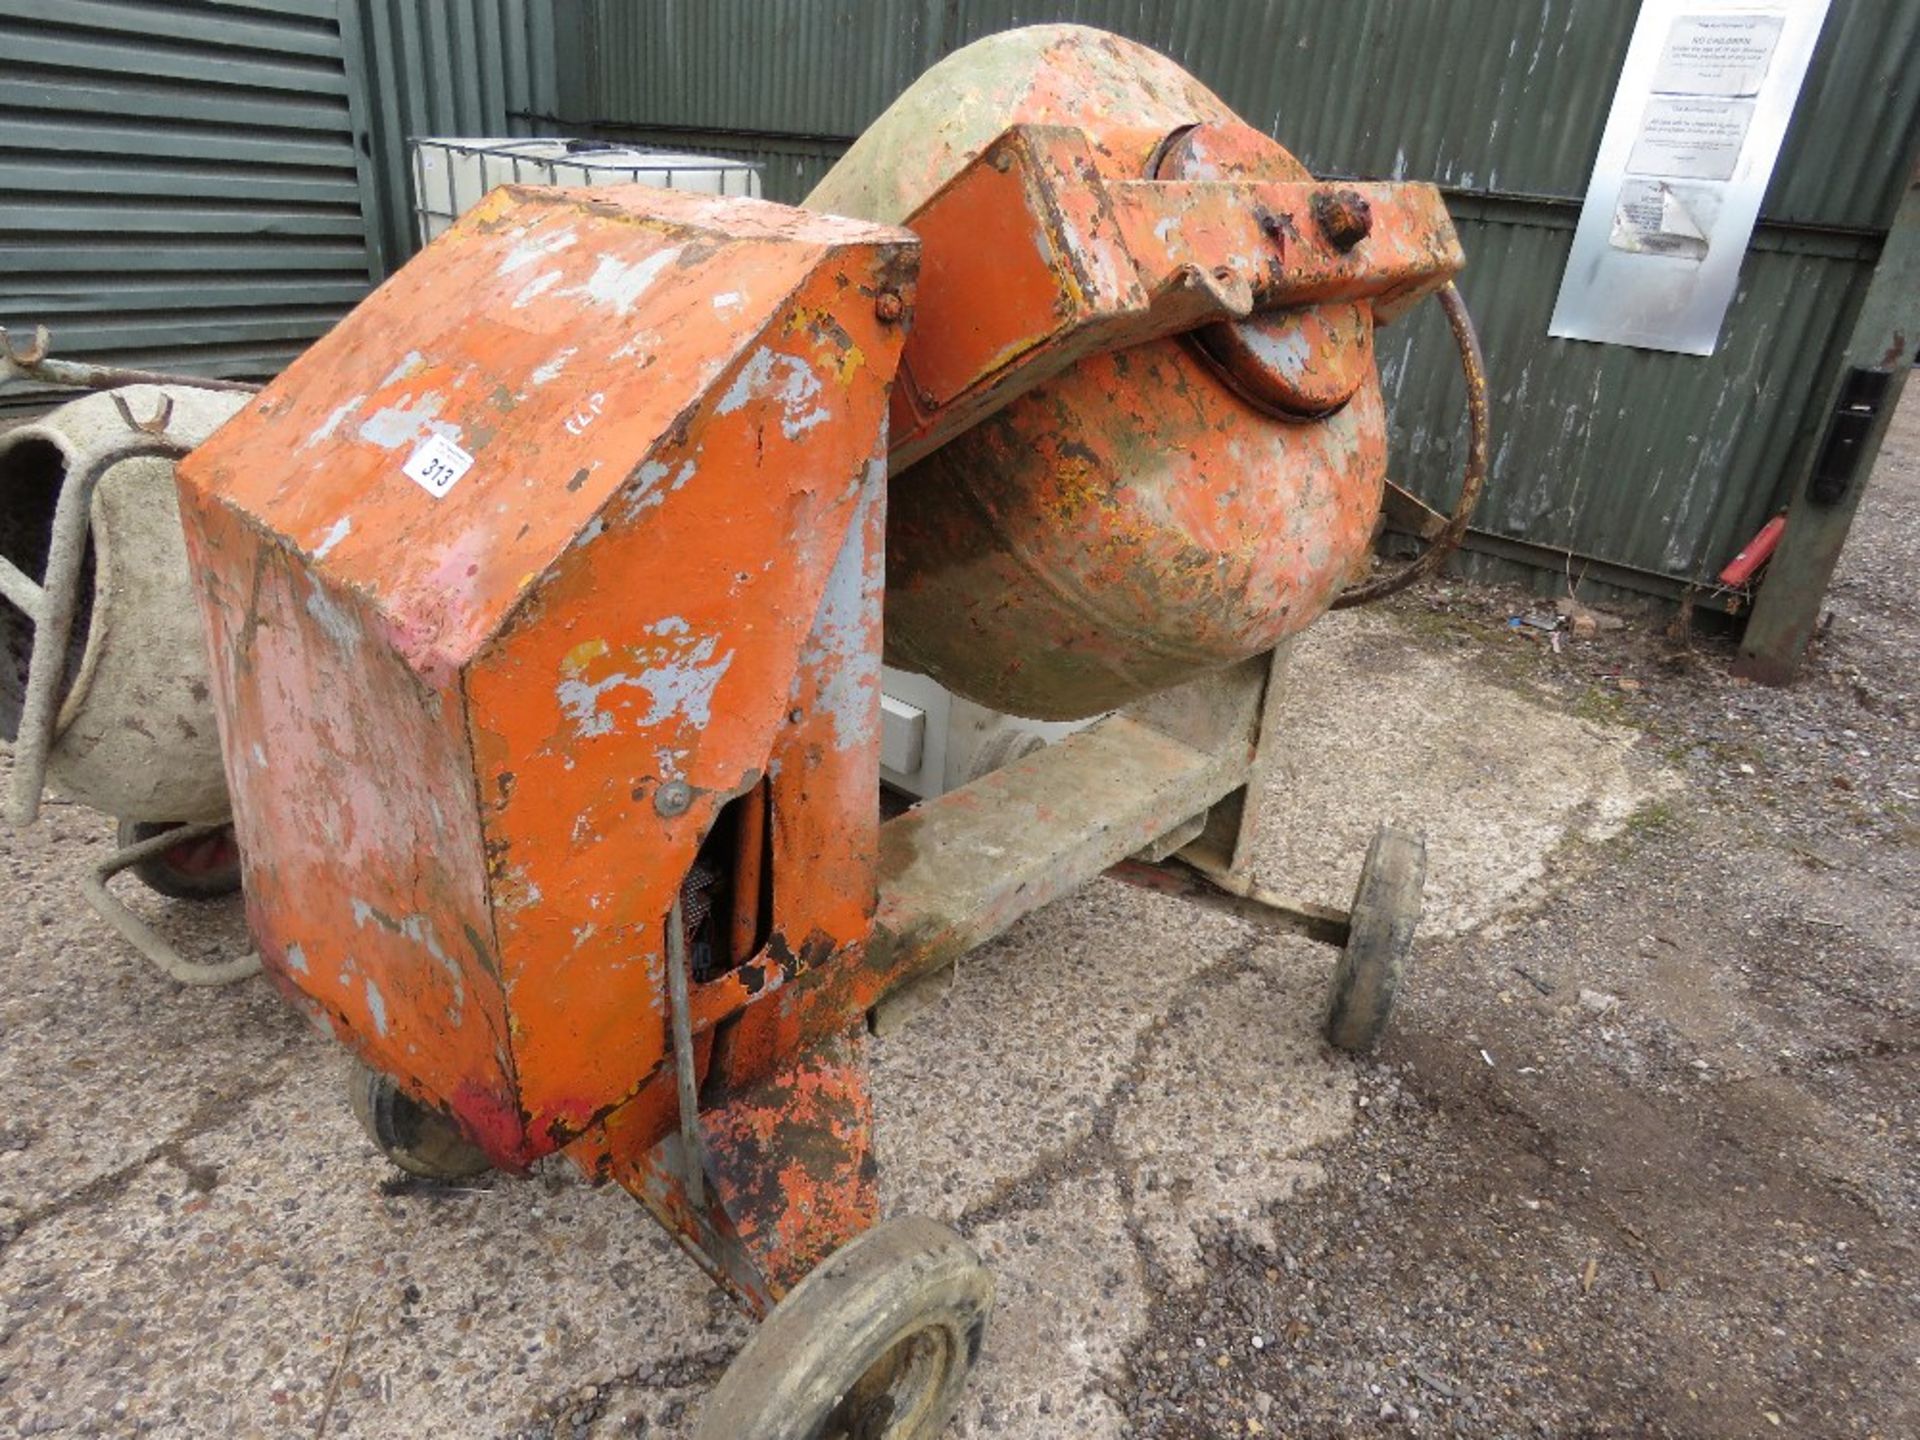 YANMAR ENGINED ELECTRIC START DIESEL MIXER. WHEN TESTED WAS SEEN TO RUN AND MIX.